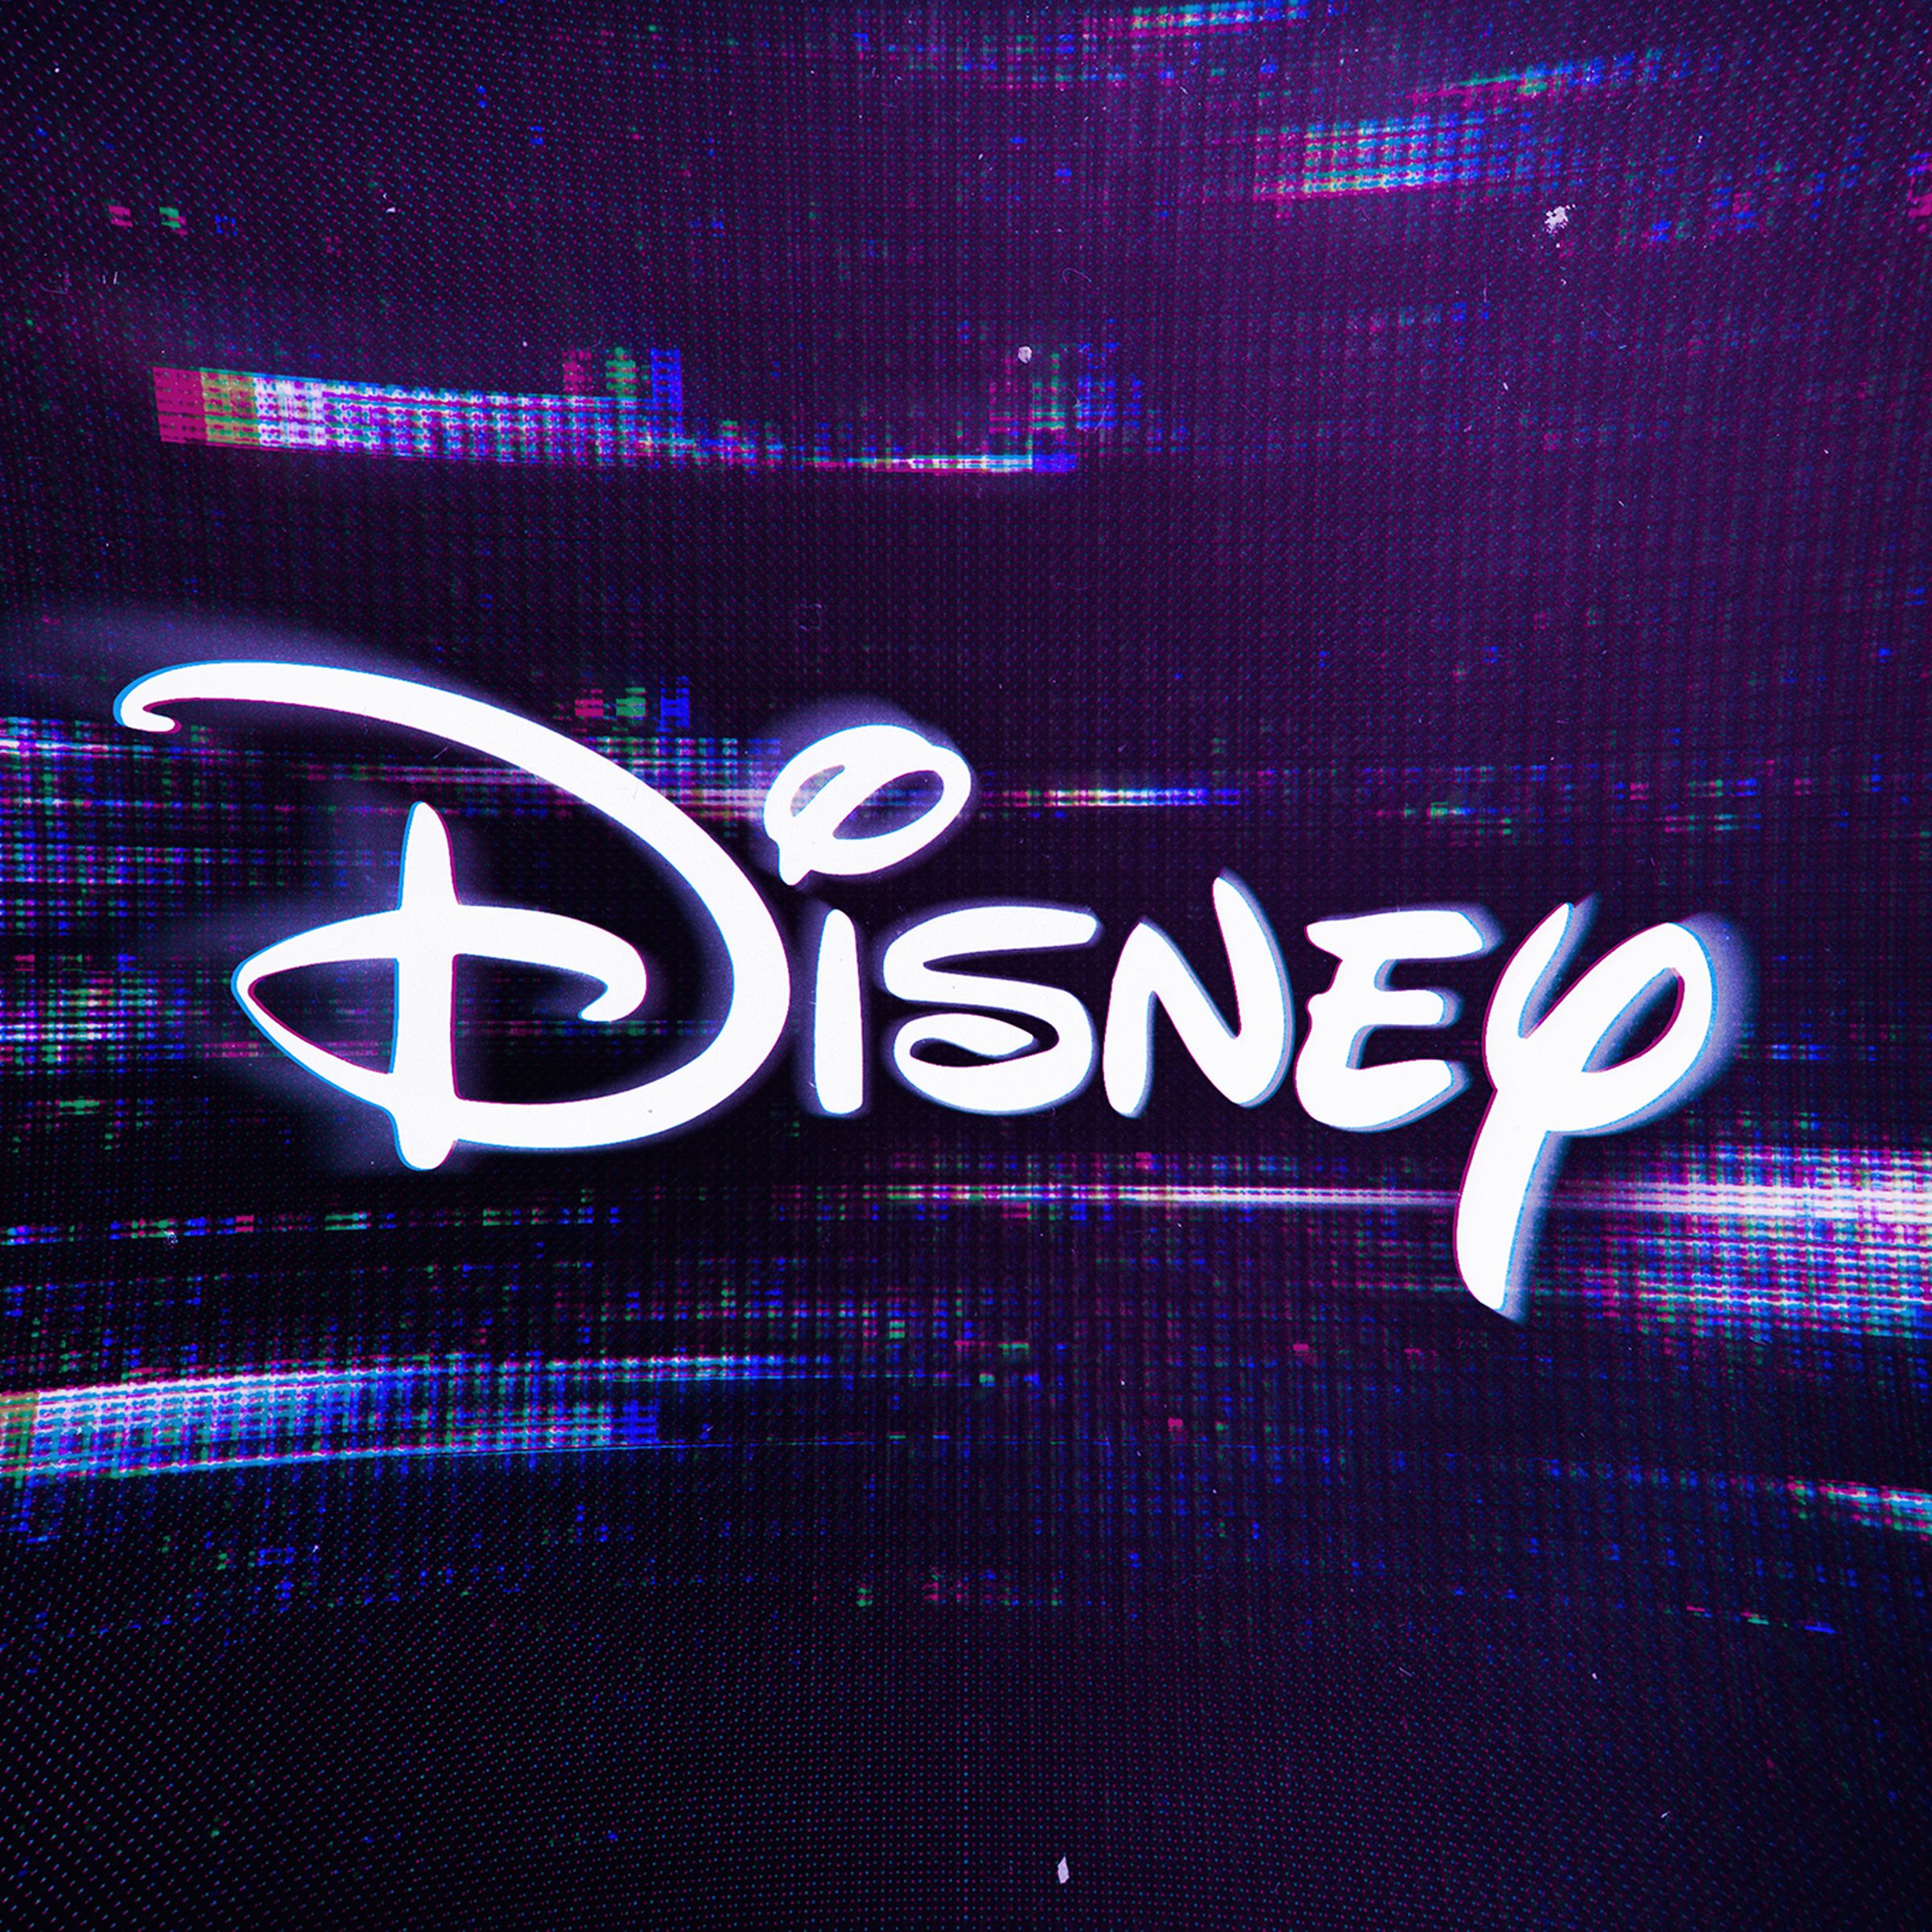 The Disney name written in white on a mostly purple background.